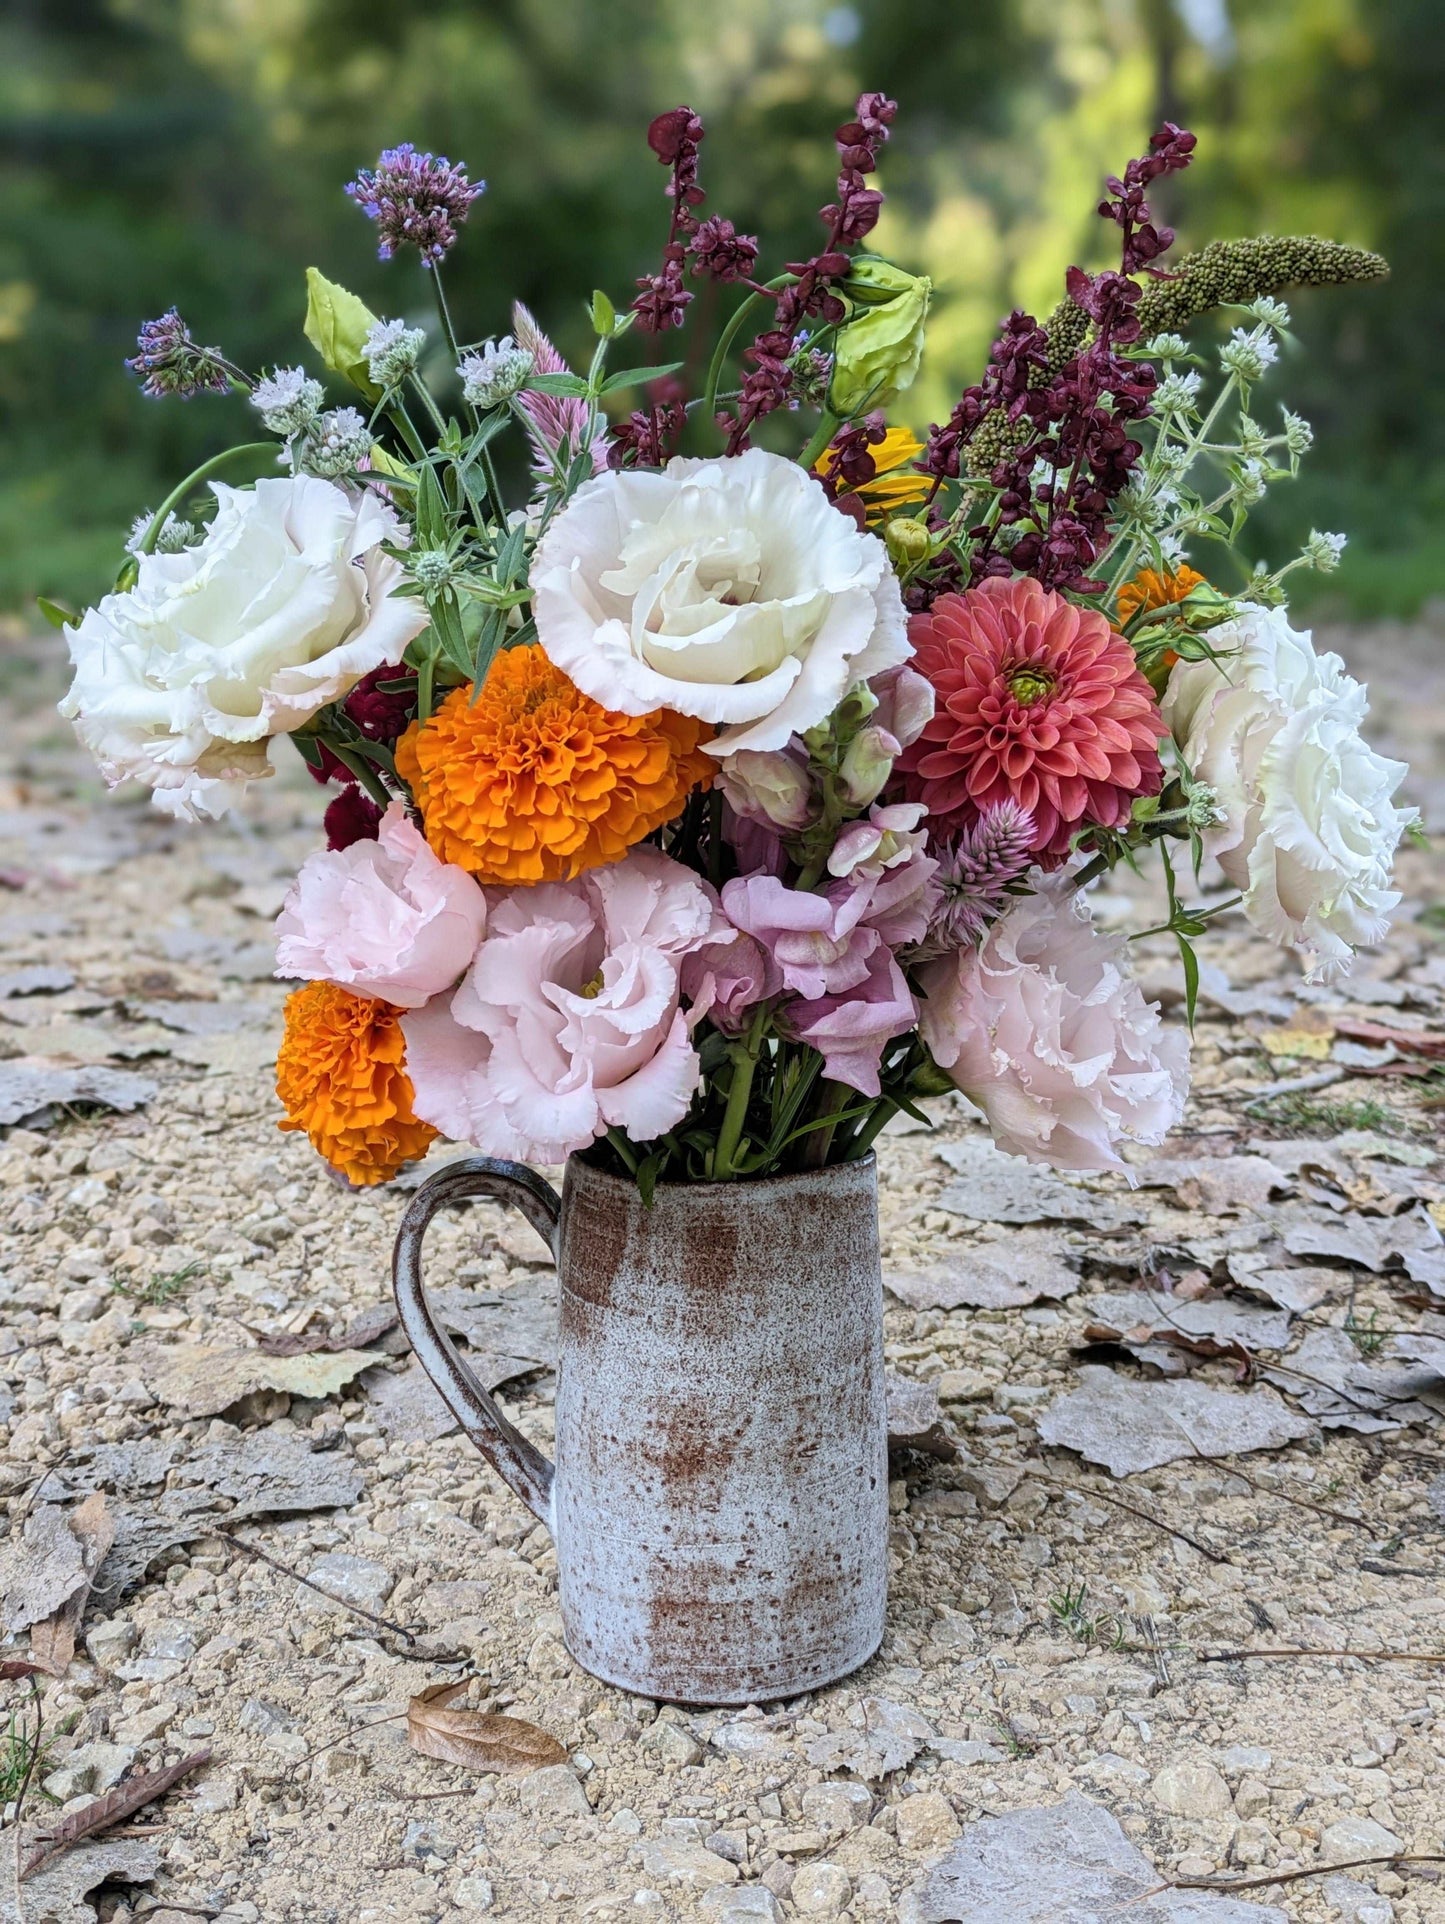 Pottery & Flowers